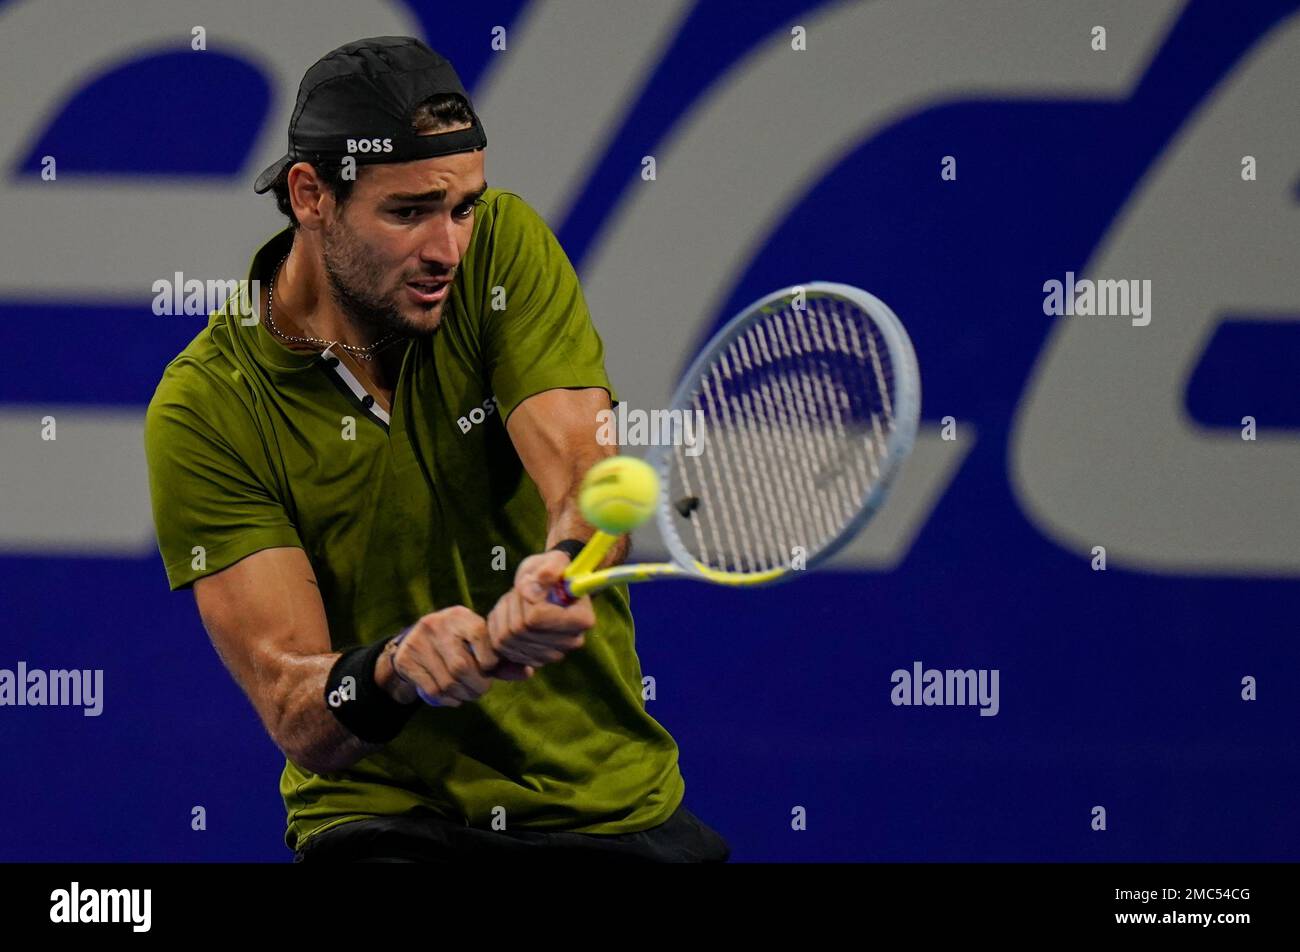 Matteo Berrettini of Italy returns a ball during a match againstto Tommy Paul of the U.S. at the Mexican Open tennis tournament in Acapulco, Mexico, Tuesday, Feb